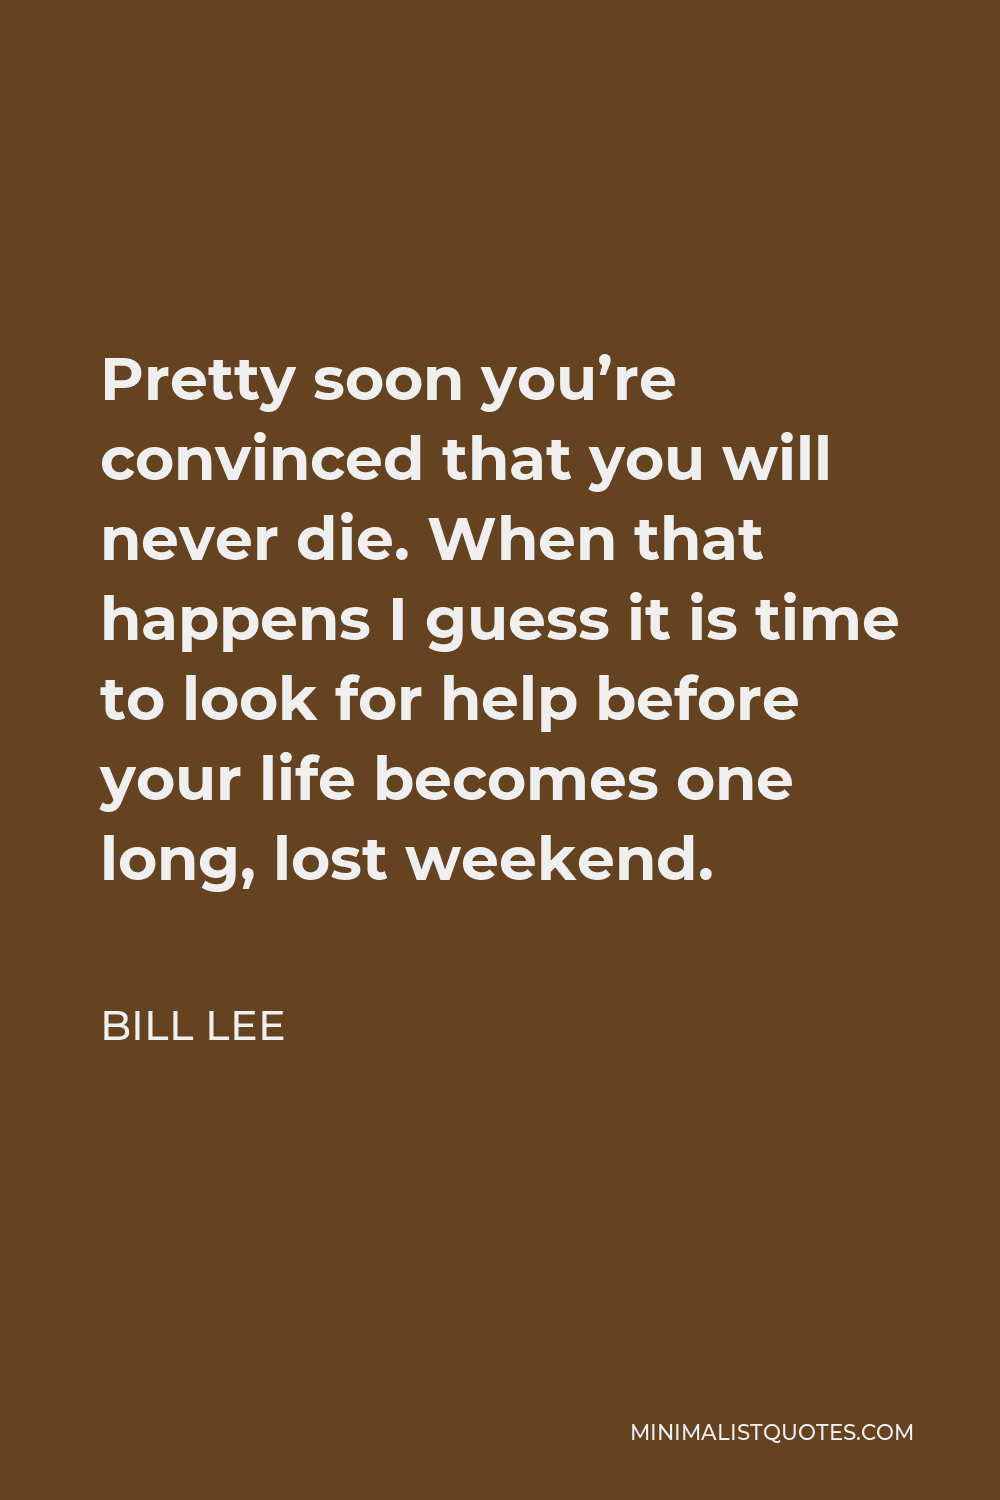 Bill Lee Quote - Pretty soon you’re convinced that you will never die. When that happens I guess it is time to look for help before your life becomes one long, lost weekend.